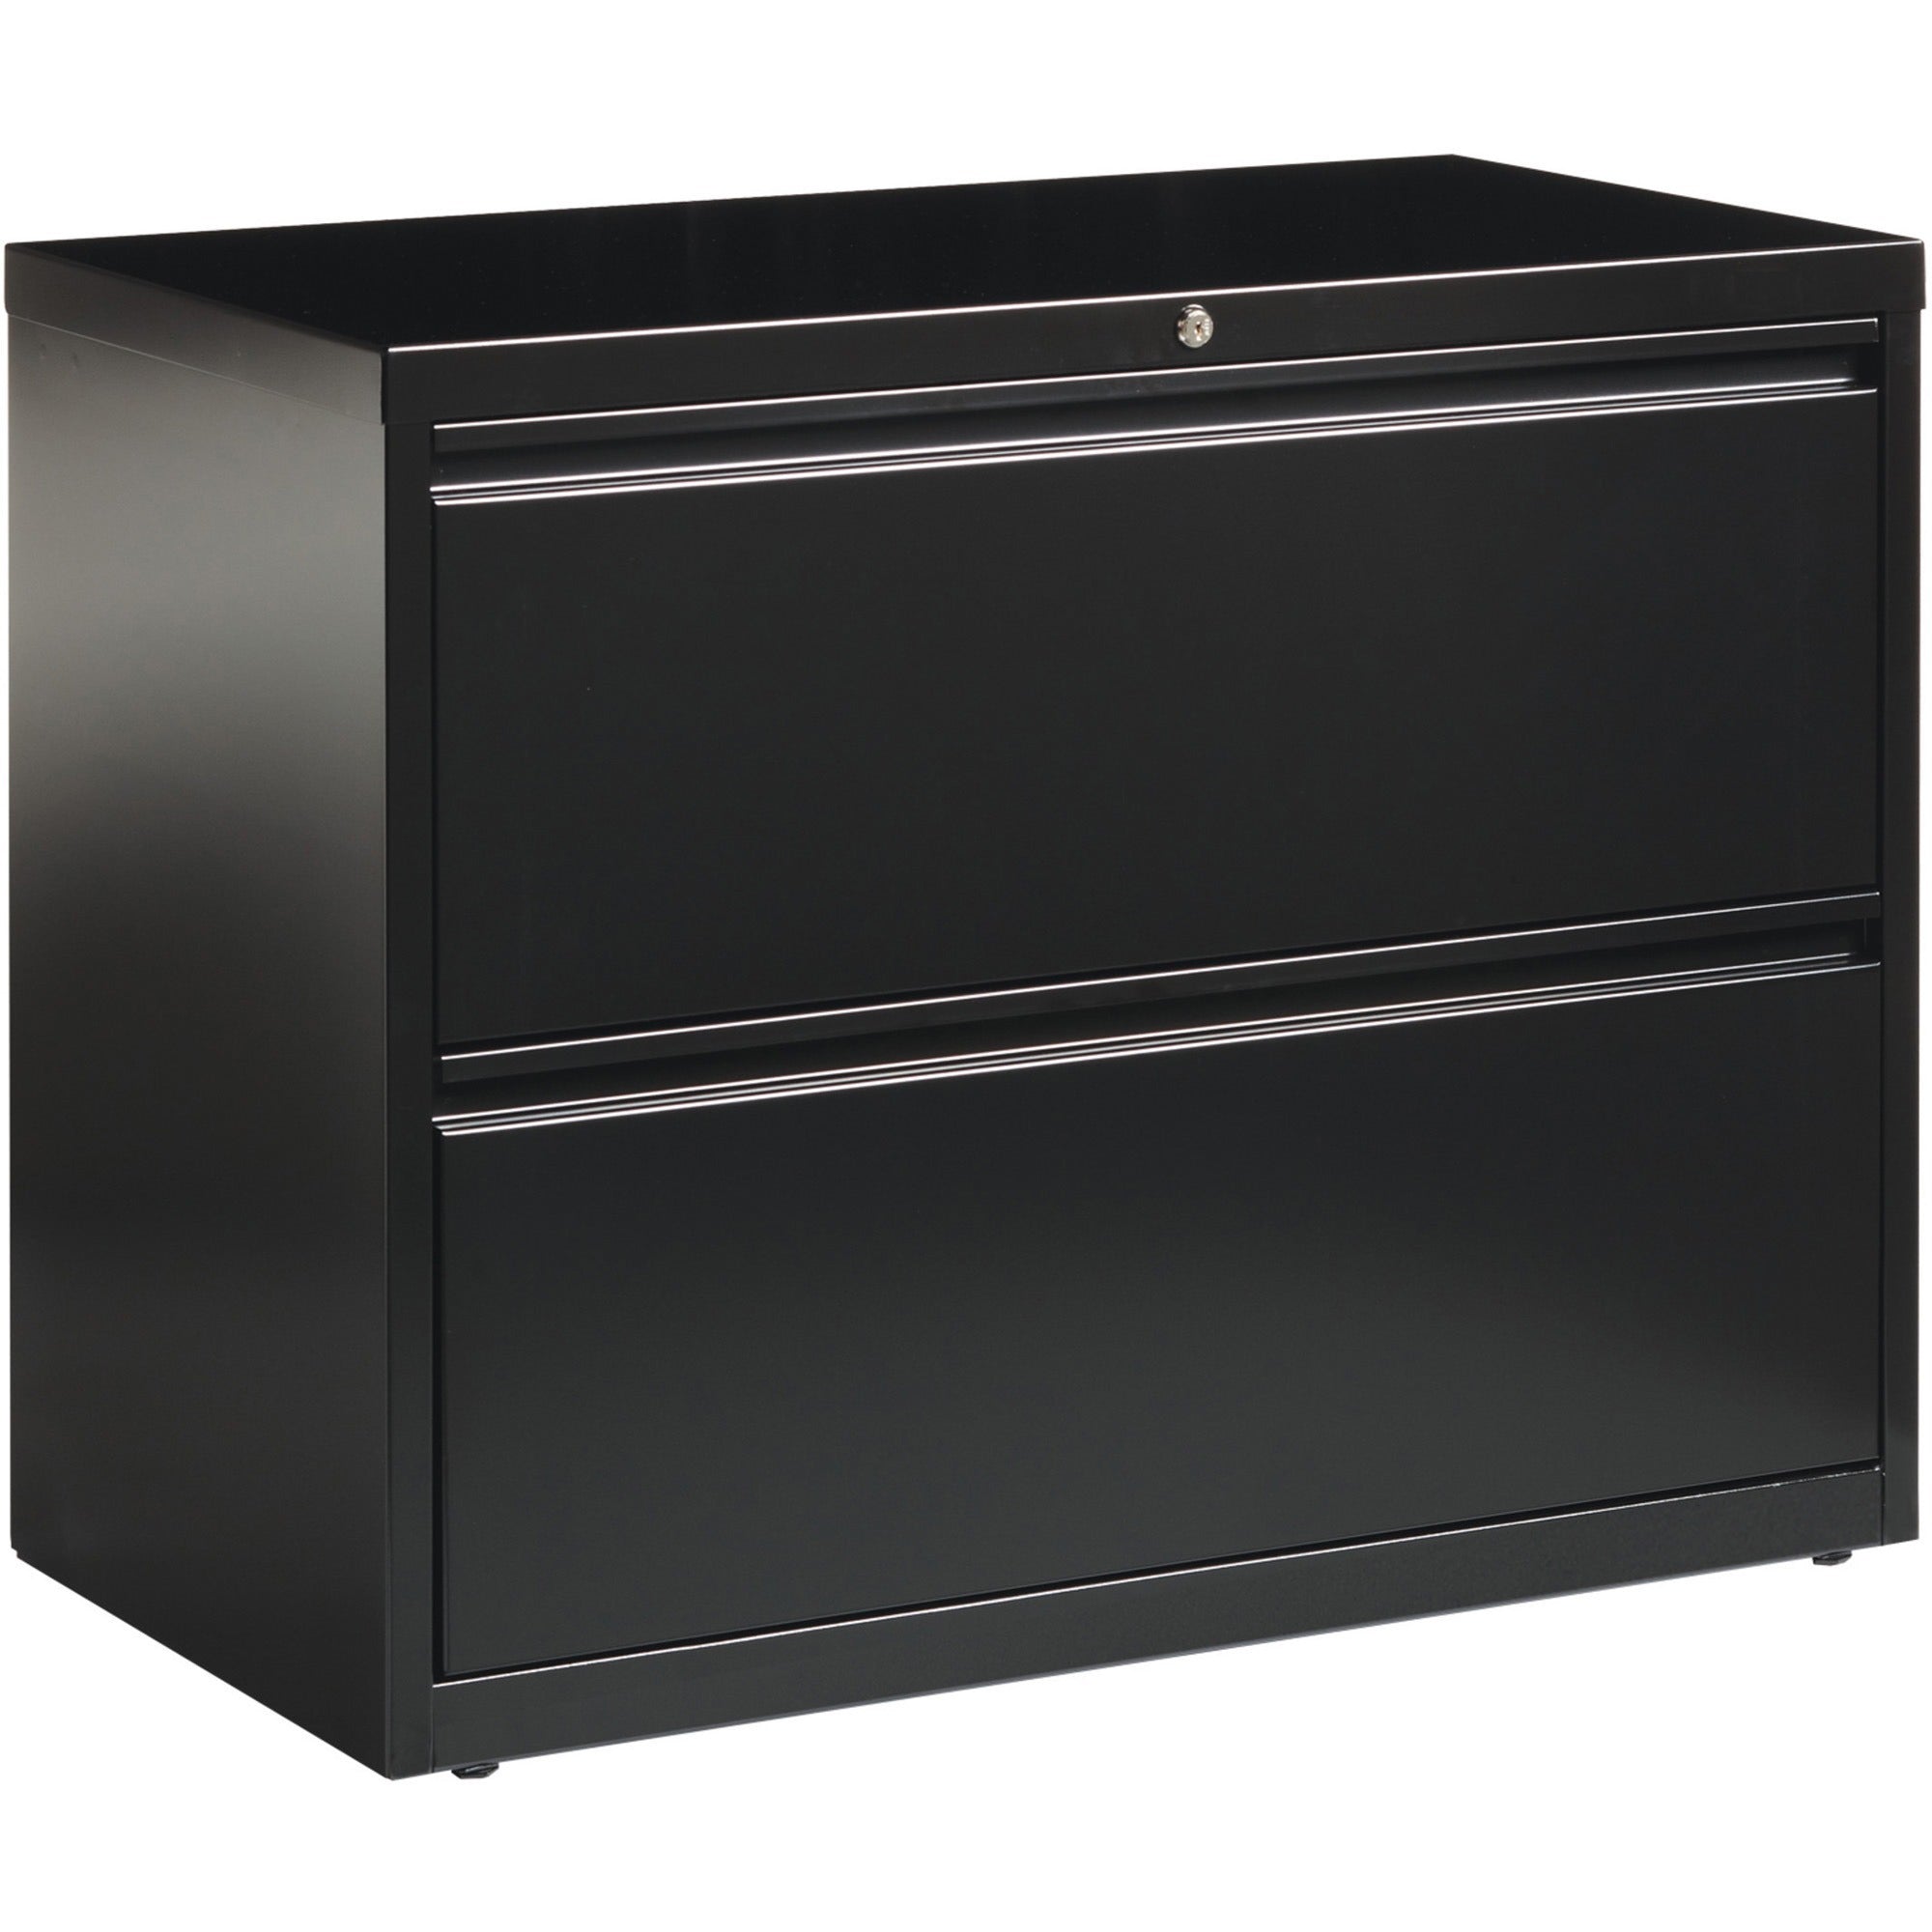 Lorell Fortress Series Lateral File - 36" x 18.6" x 28.1" - 2 x Drawer(s) for File - Letter, Legal, A4 - Lateral - Leveling Glide, Label Holder, Ball-bearing Suspension, Interlocking - Black - Steel - Recycled - 